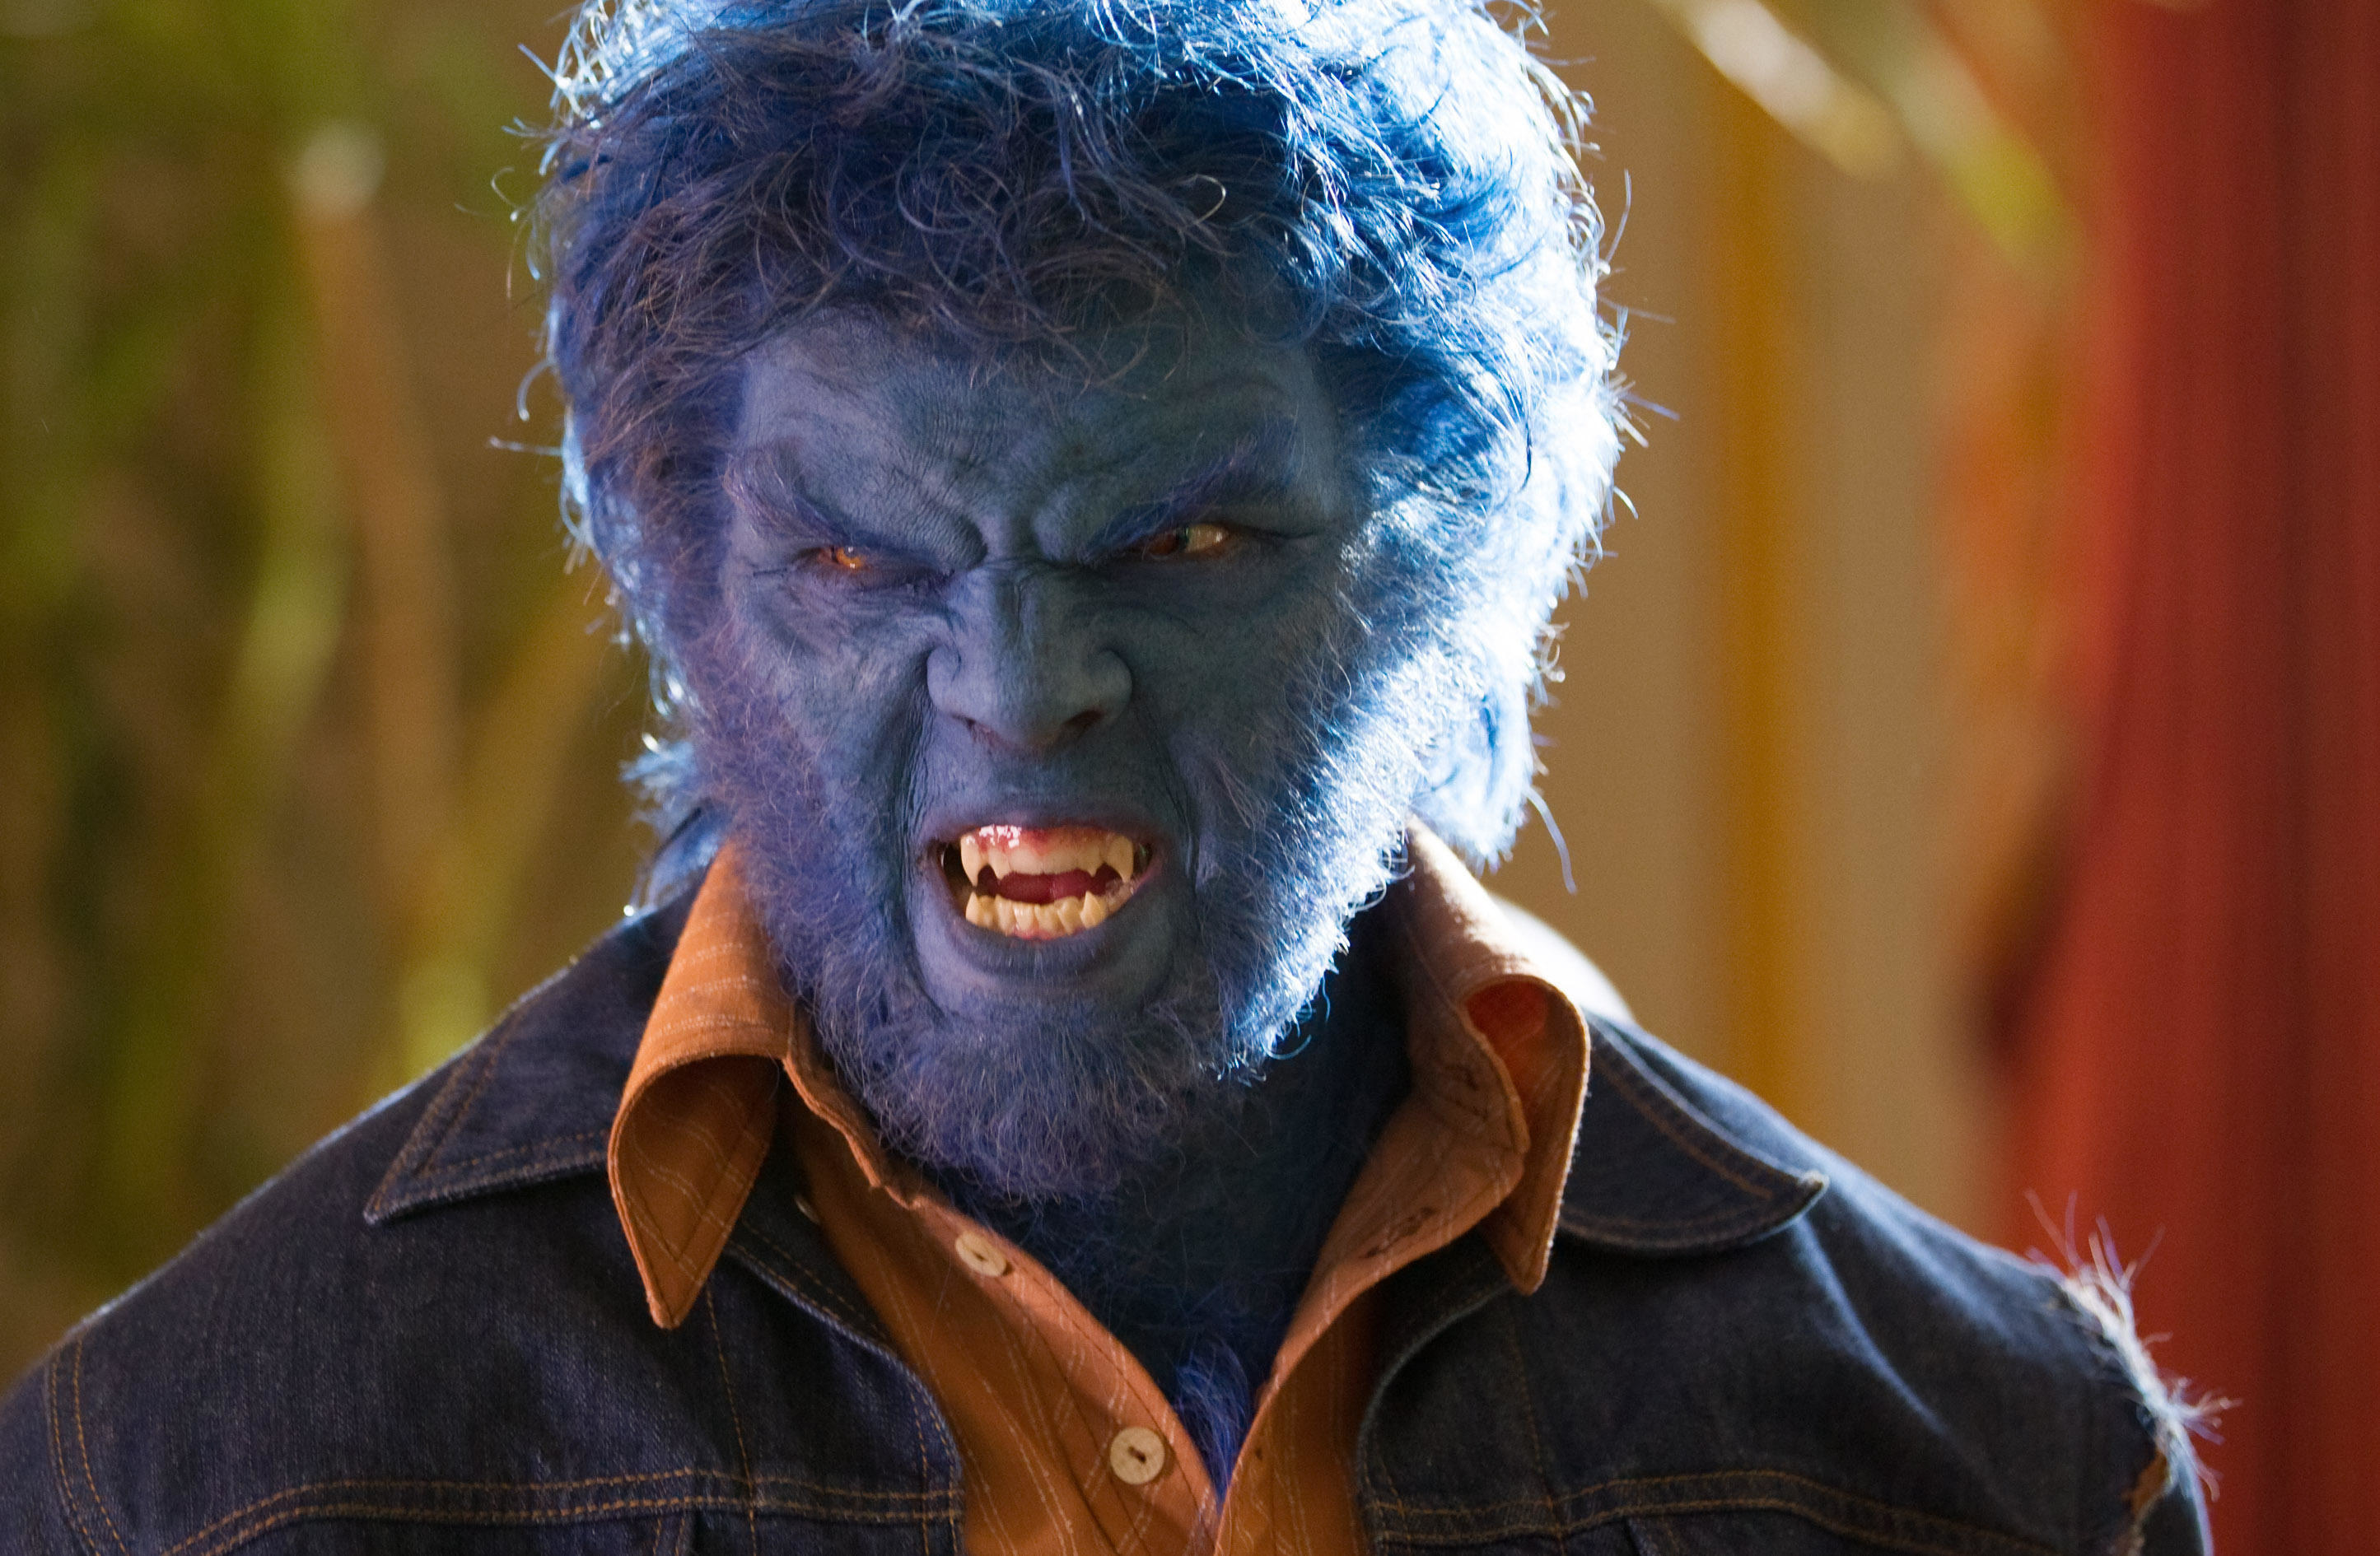 A blue-haired, blue-skinned monstrous mutant in a denim jacket snarls at the camera